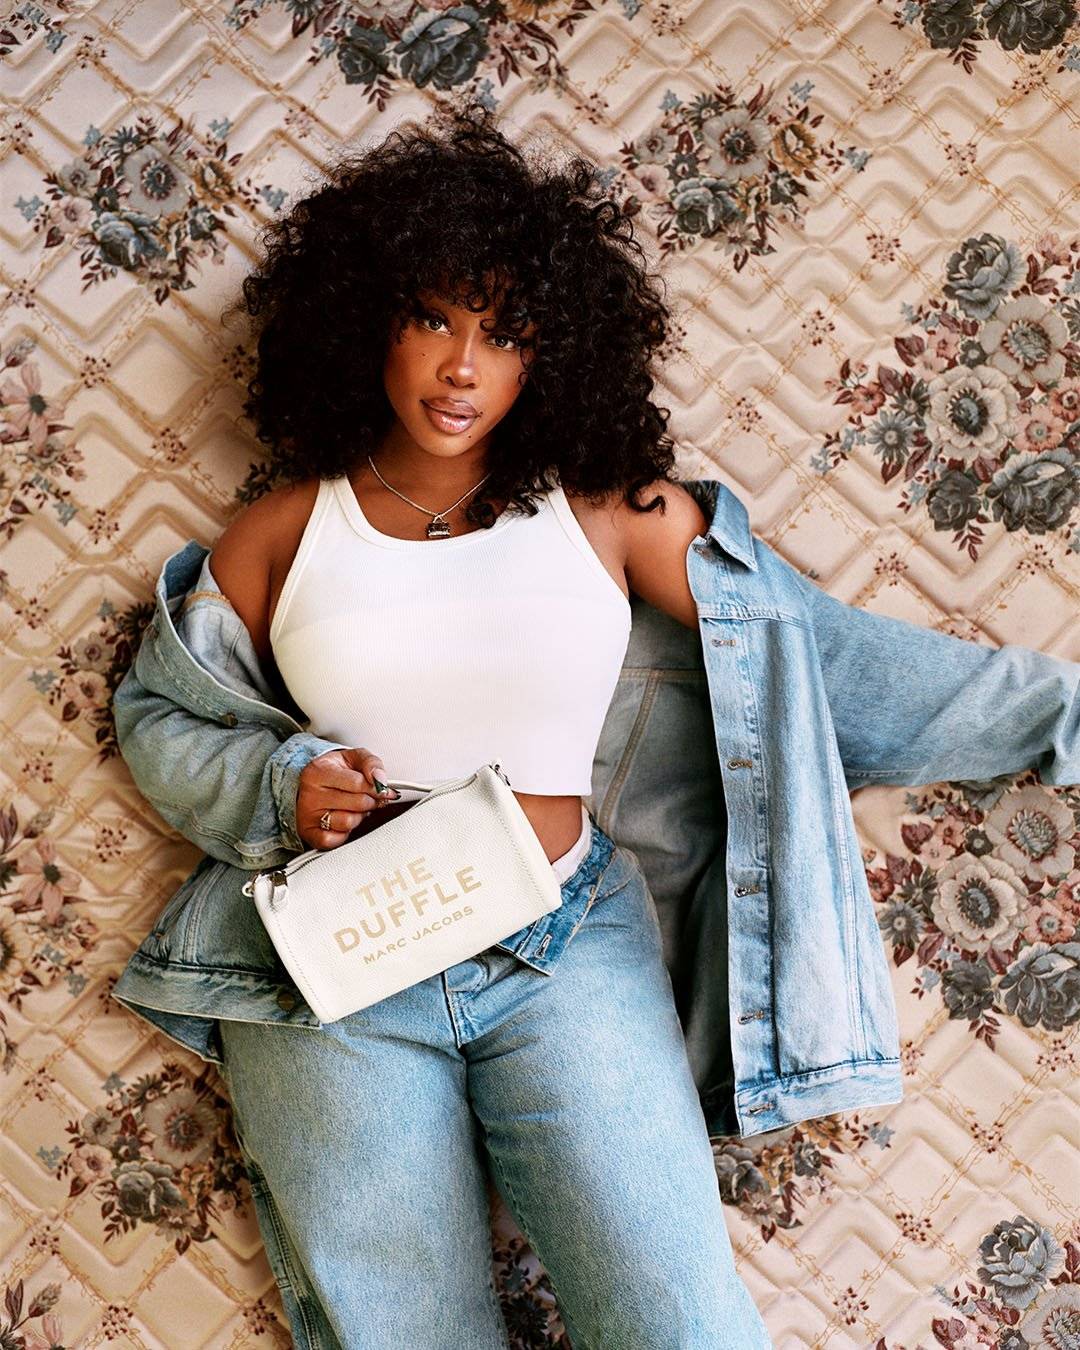 SZA with the Duffle